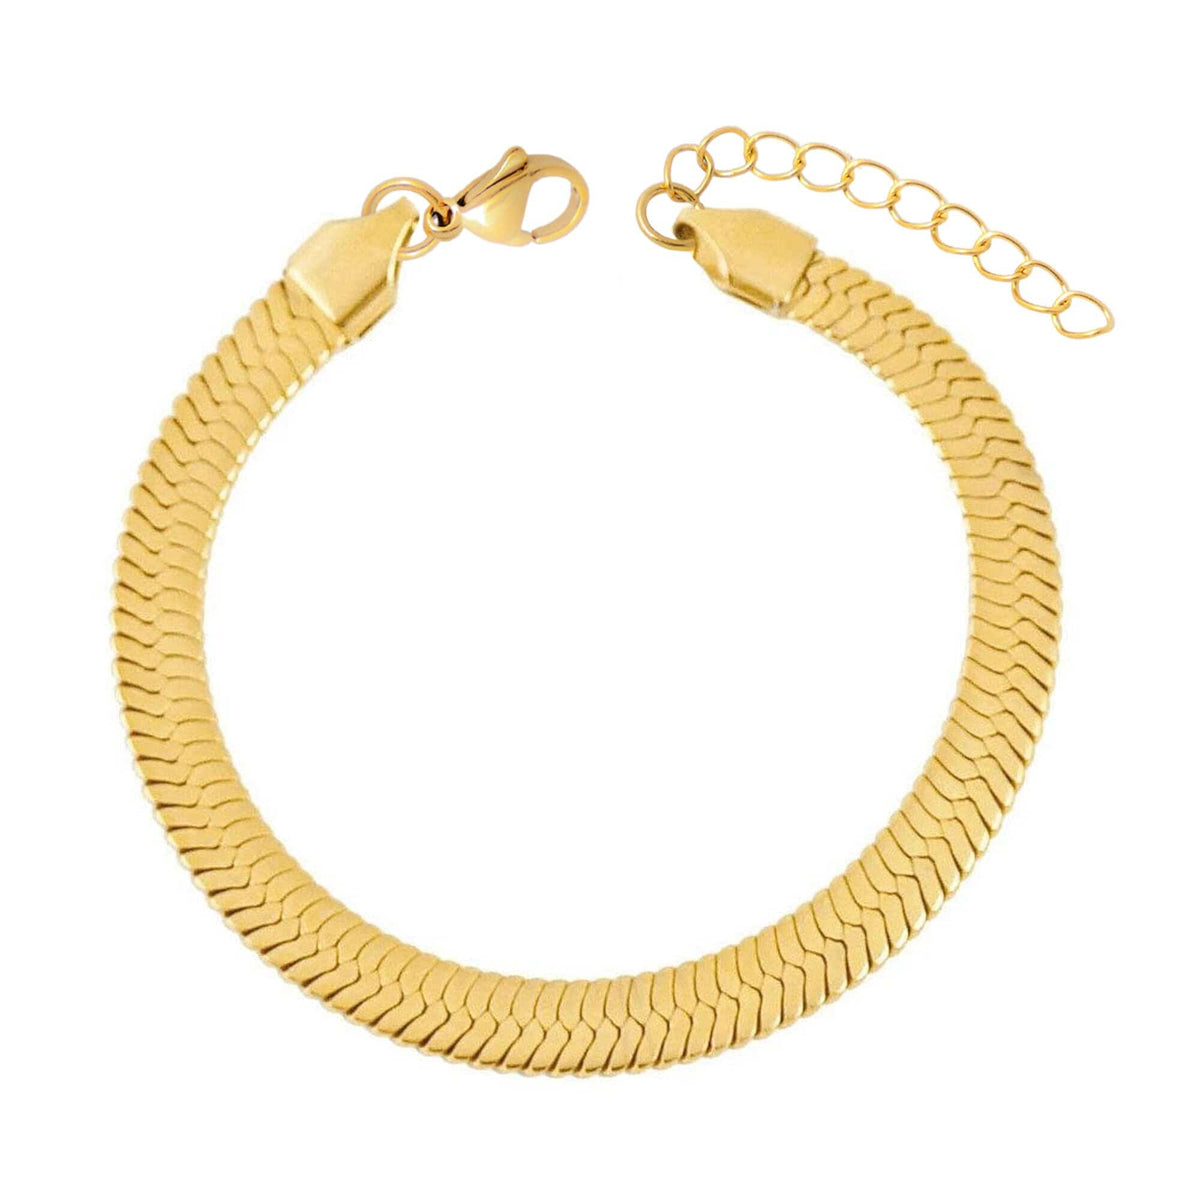 BohoMoon Stainless Steel Sophie Anklet Gold